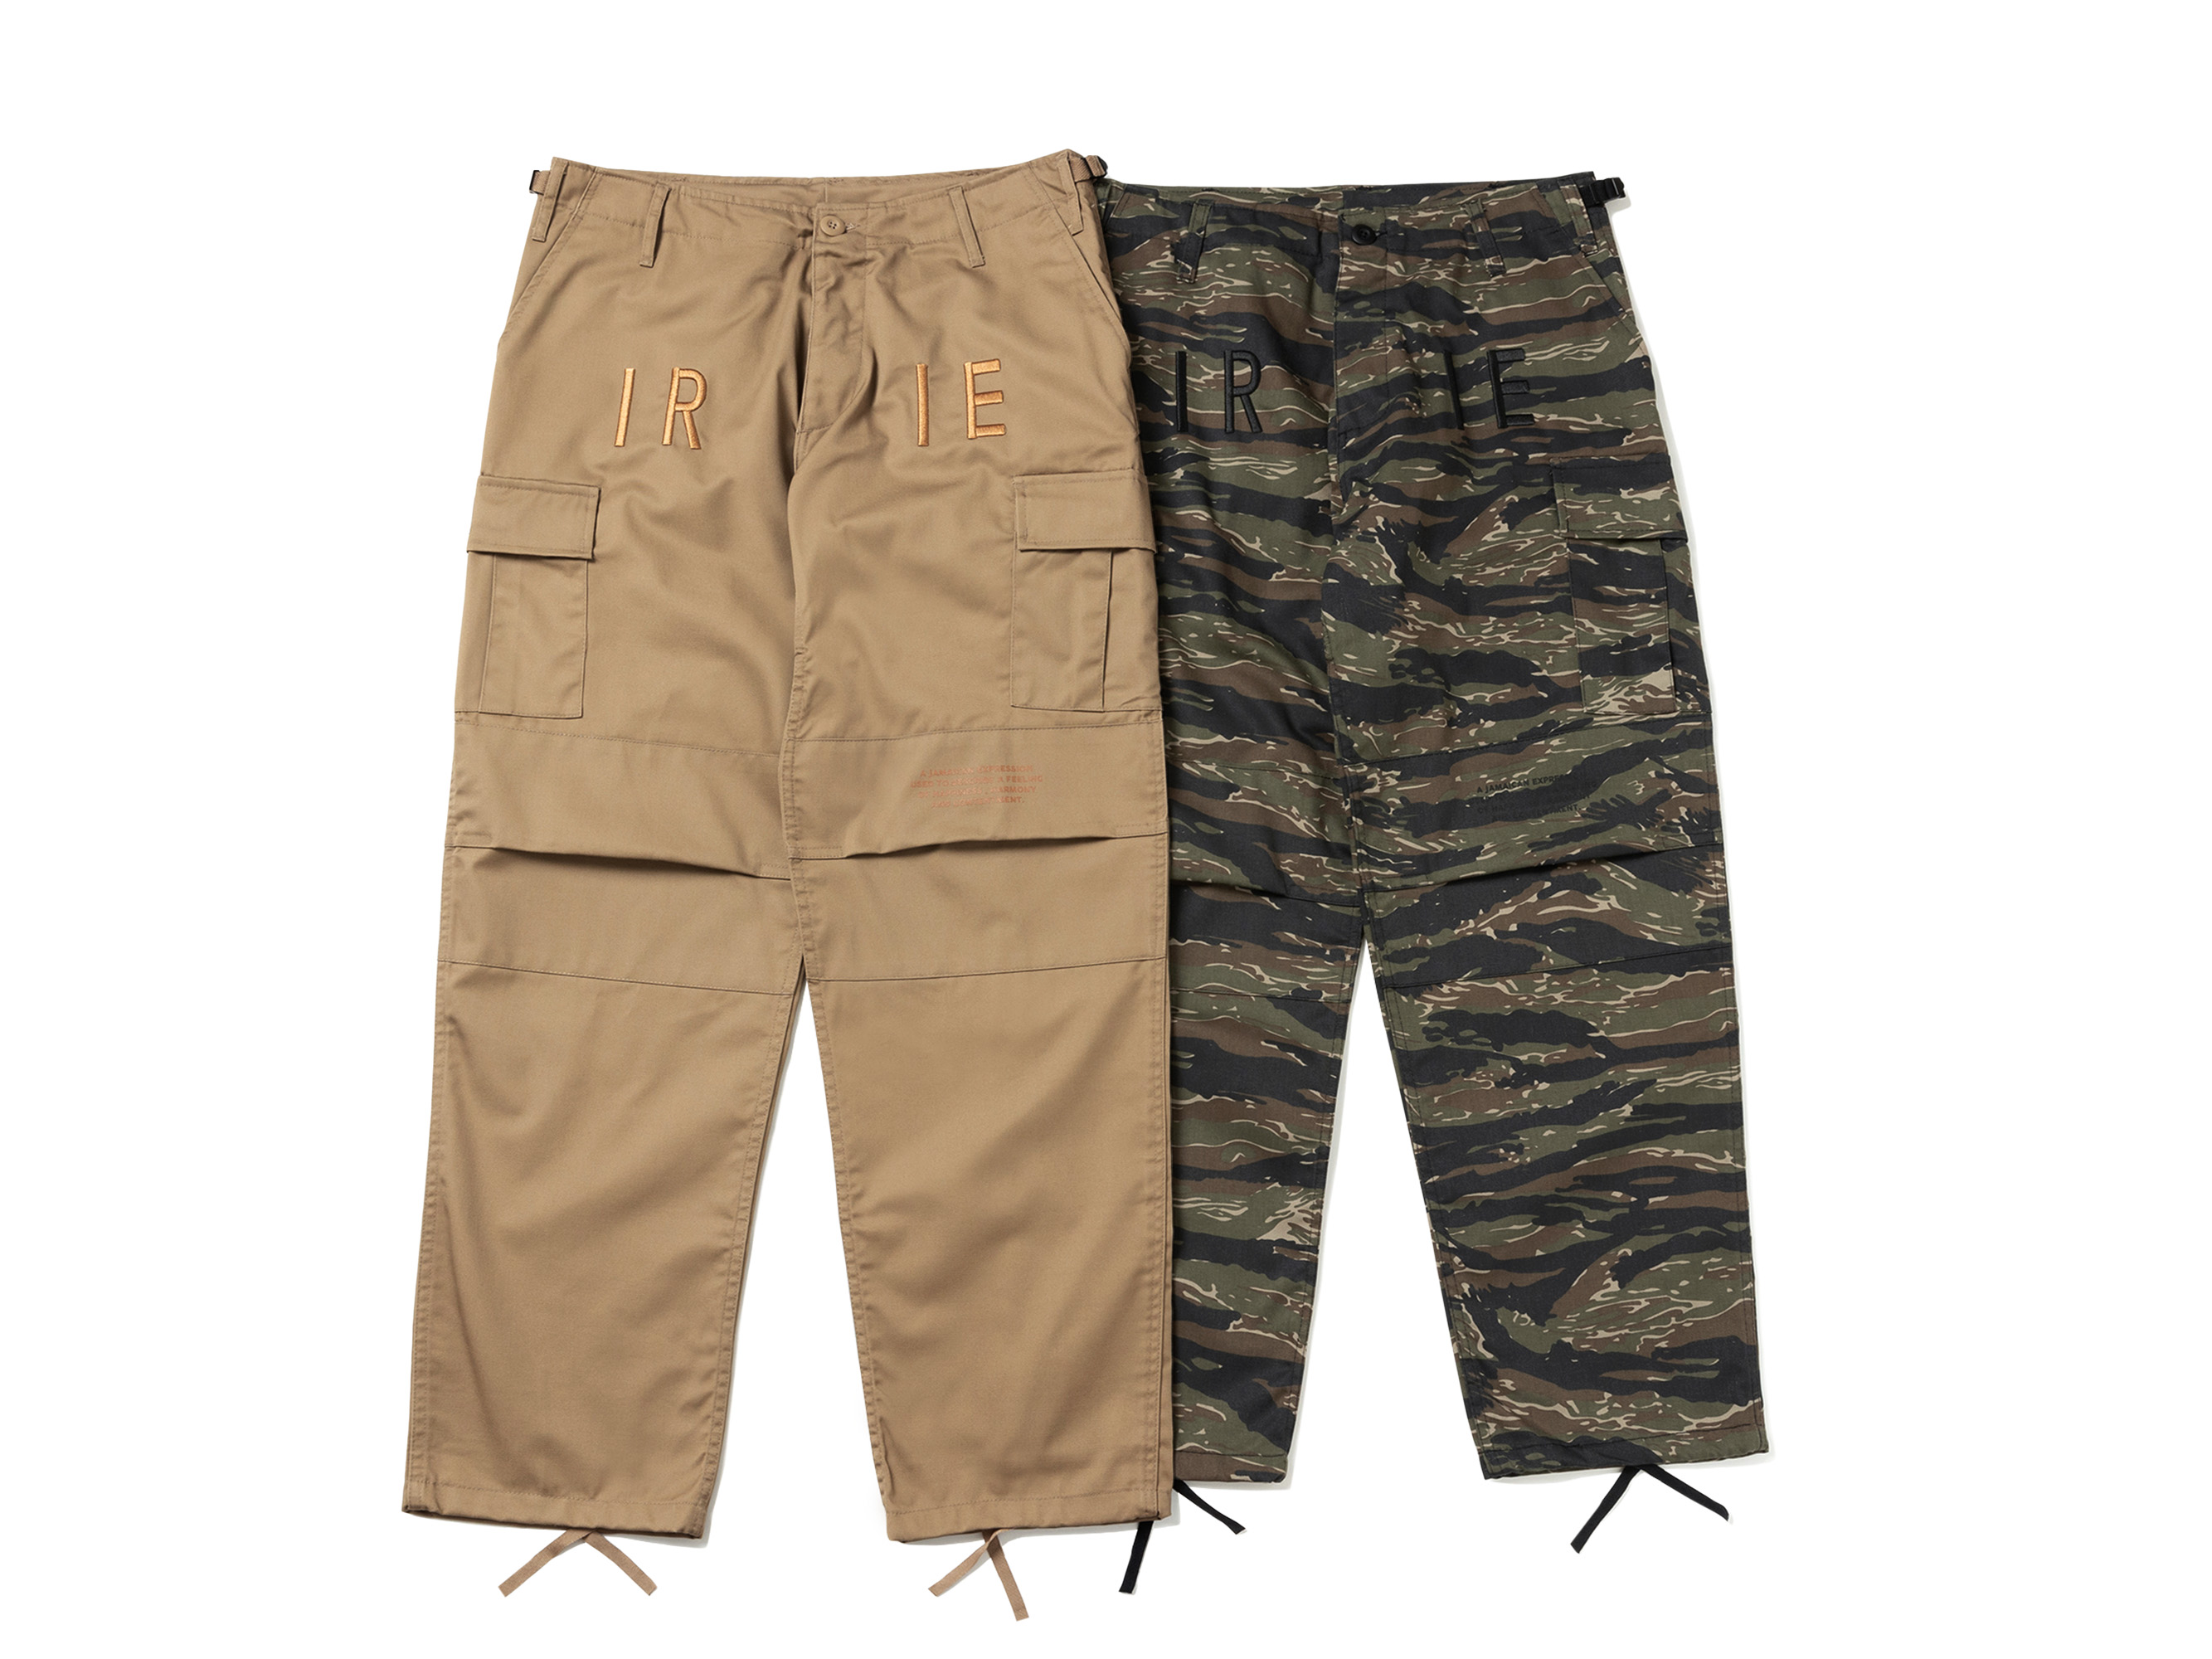 【40%OFF】3D LOGO CARGO PANTS - IRIE by irielife